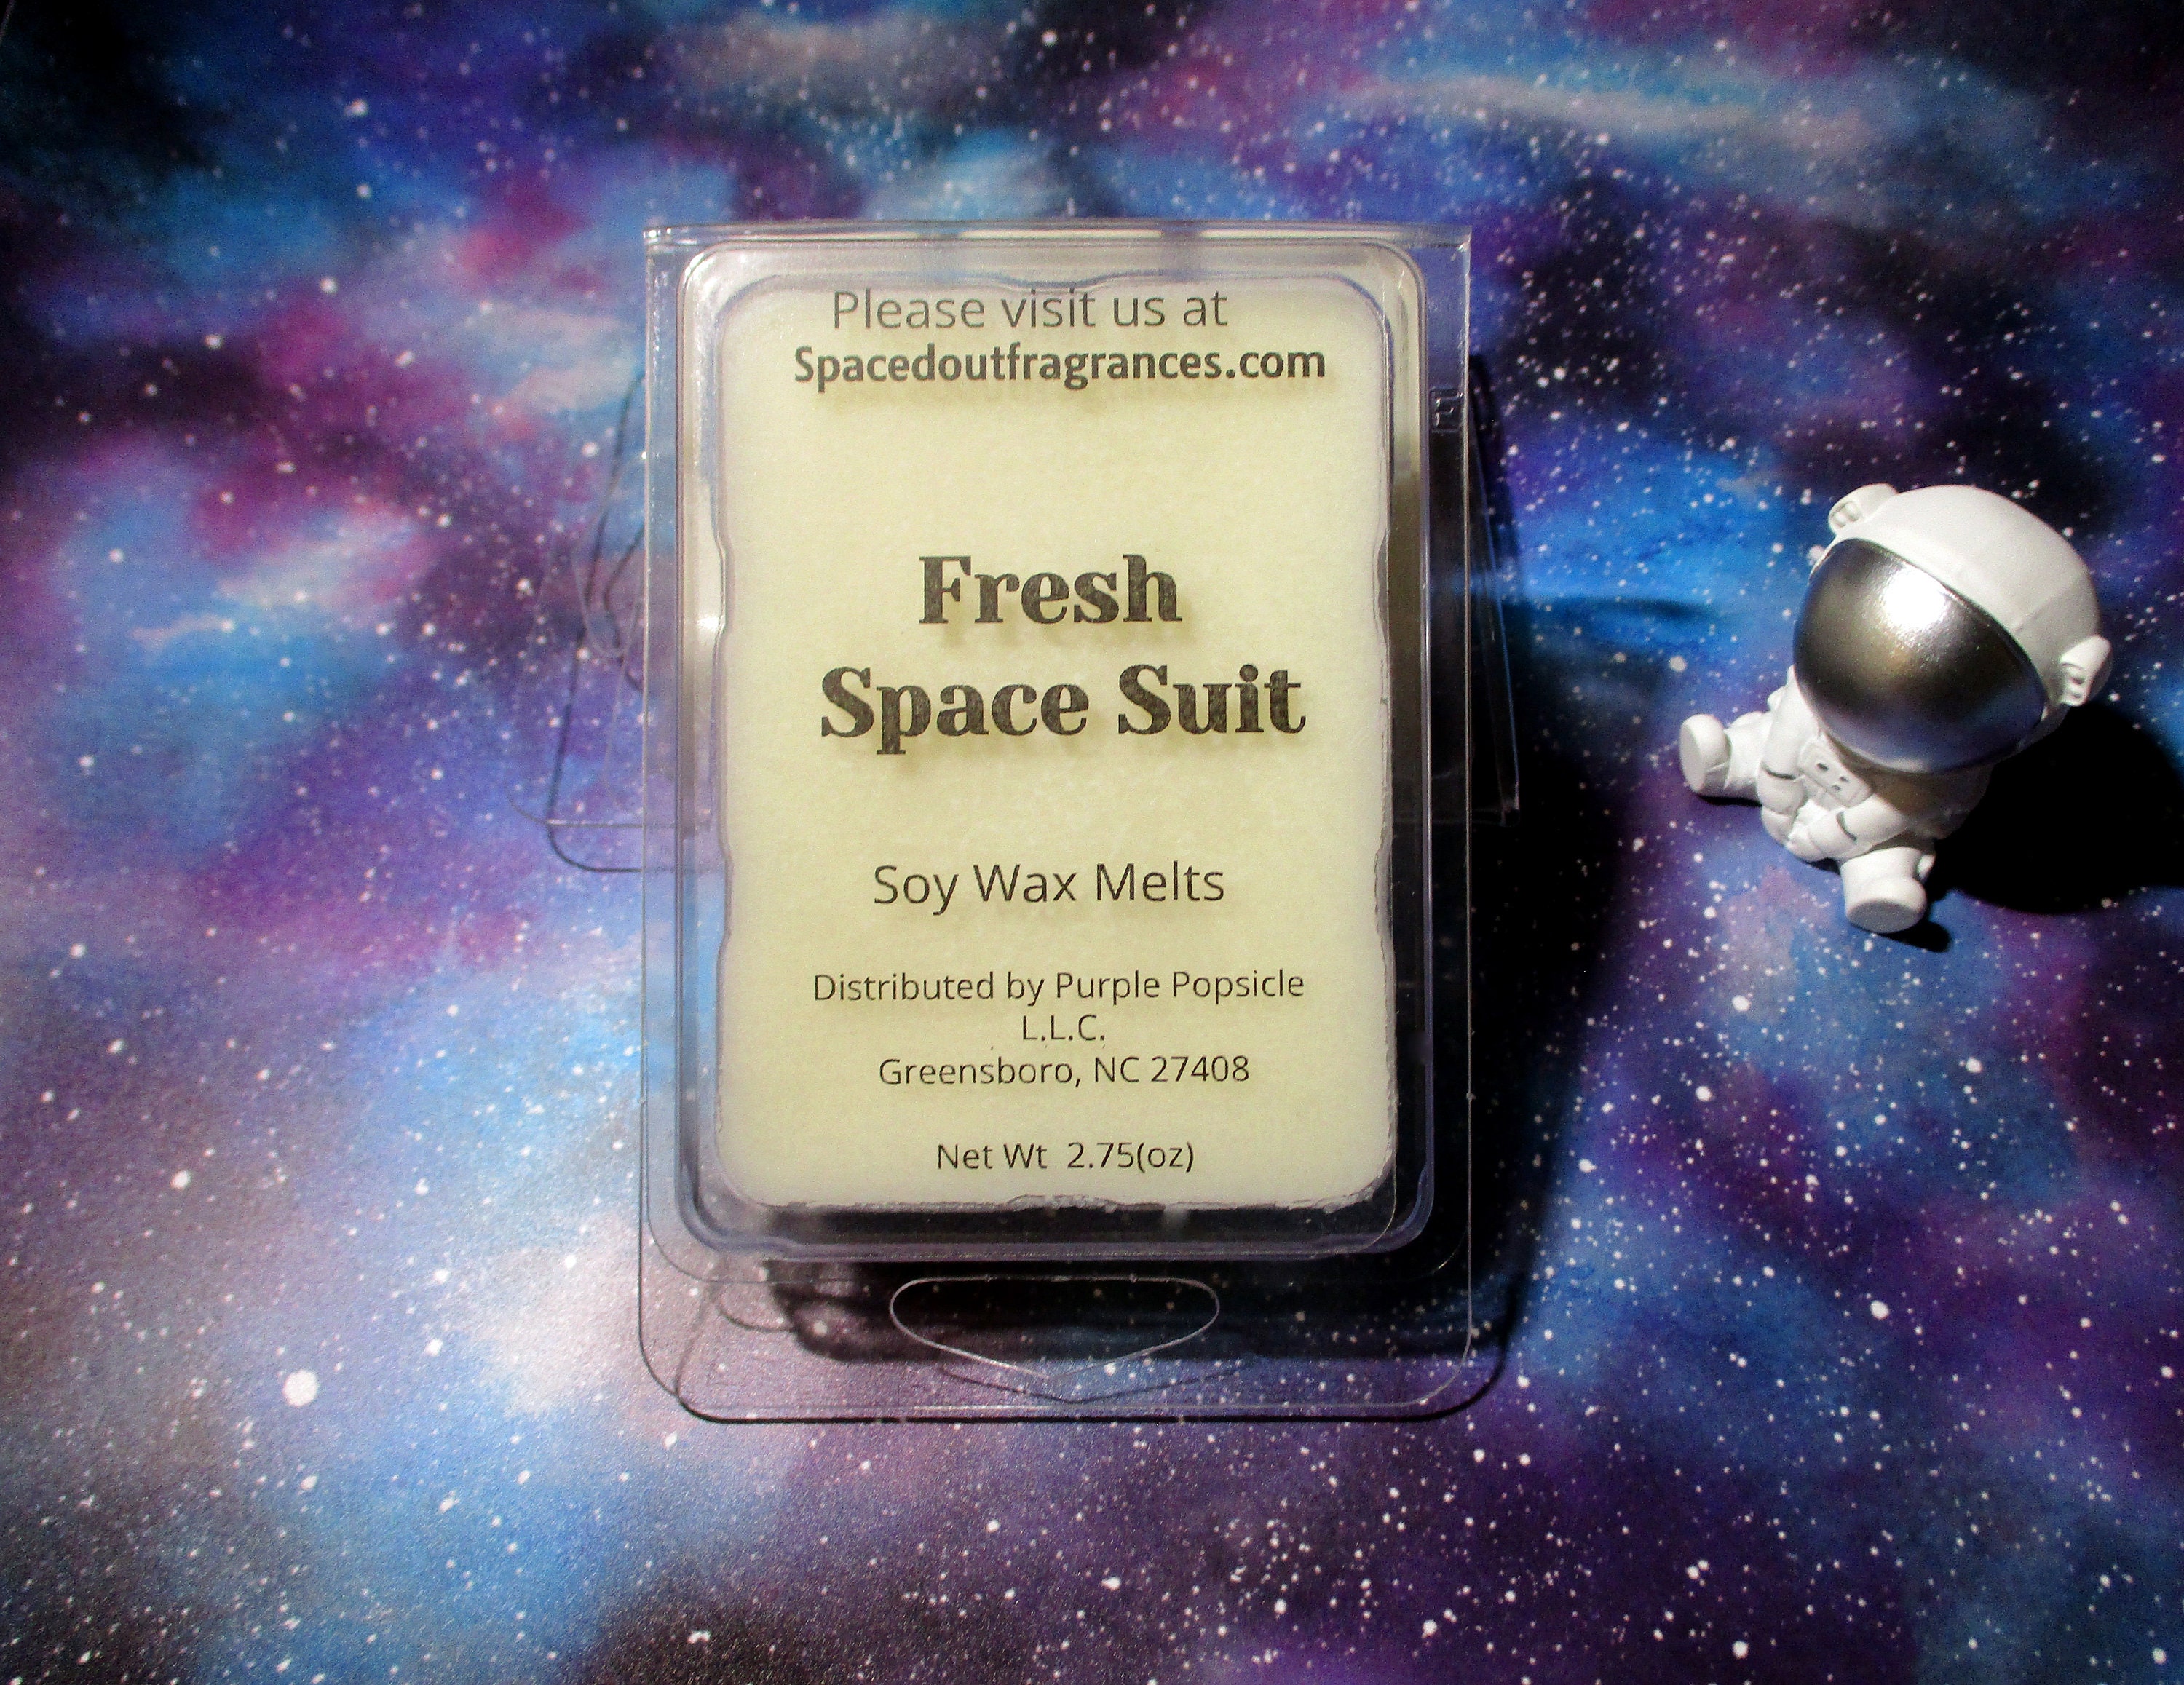 Eucalyptus and Mint Soy Wax Melts Green Wax Melts Square Wax Melts Fresh  Scent Relaxing Scent Soy Wax Herbal Wax Melts handmade 